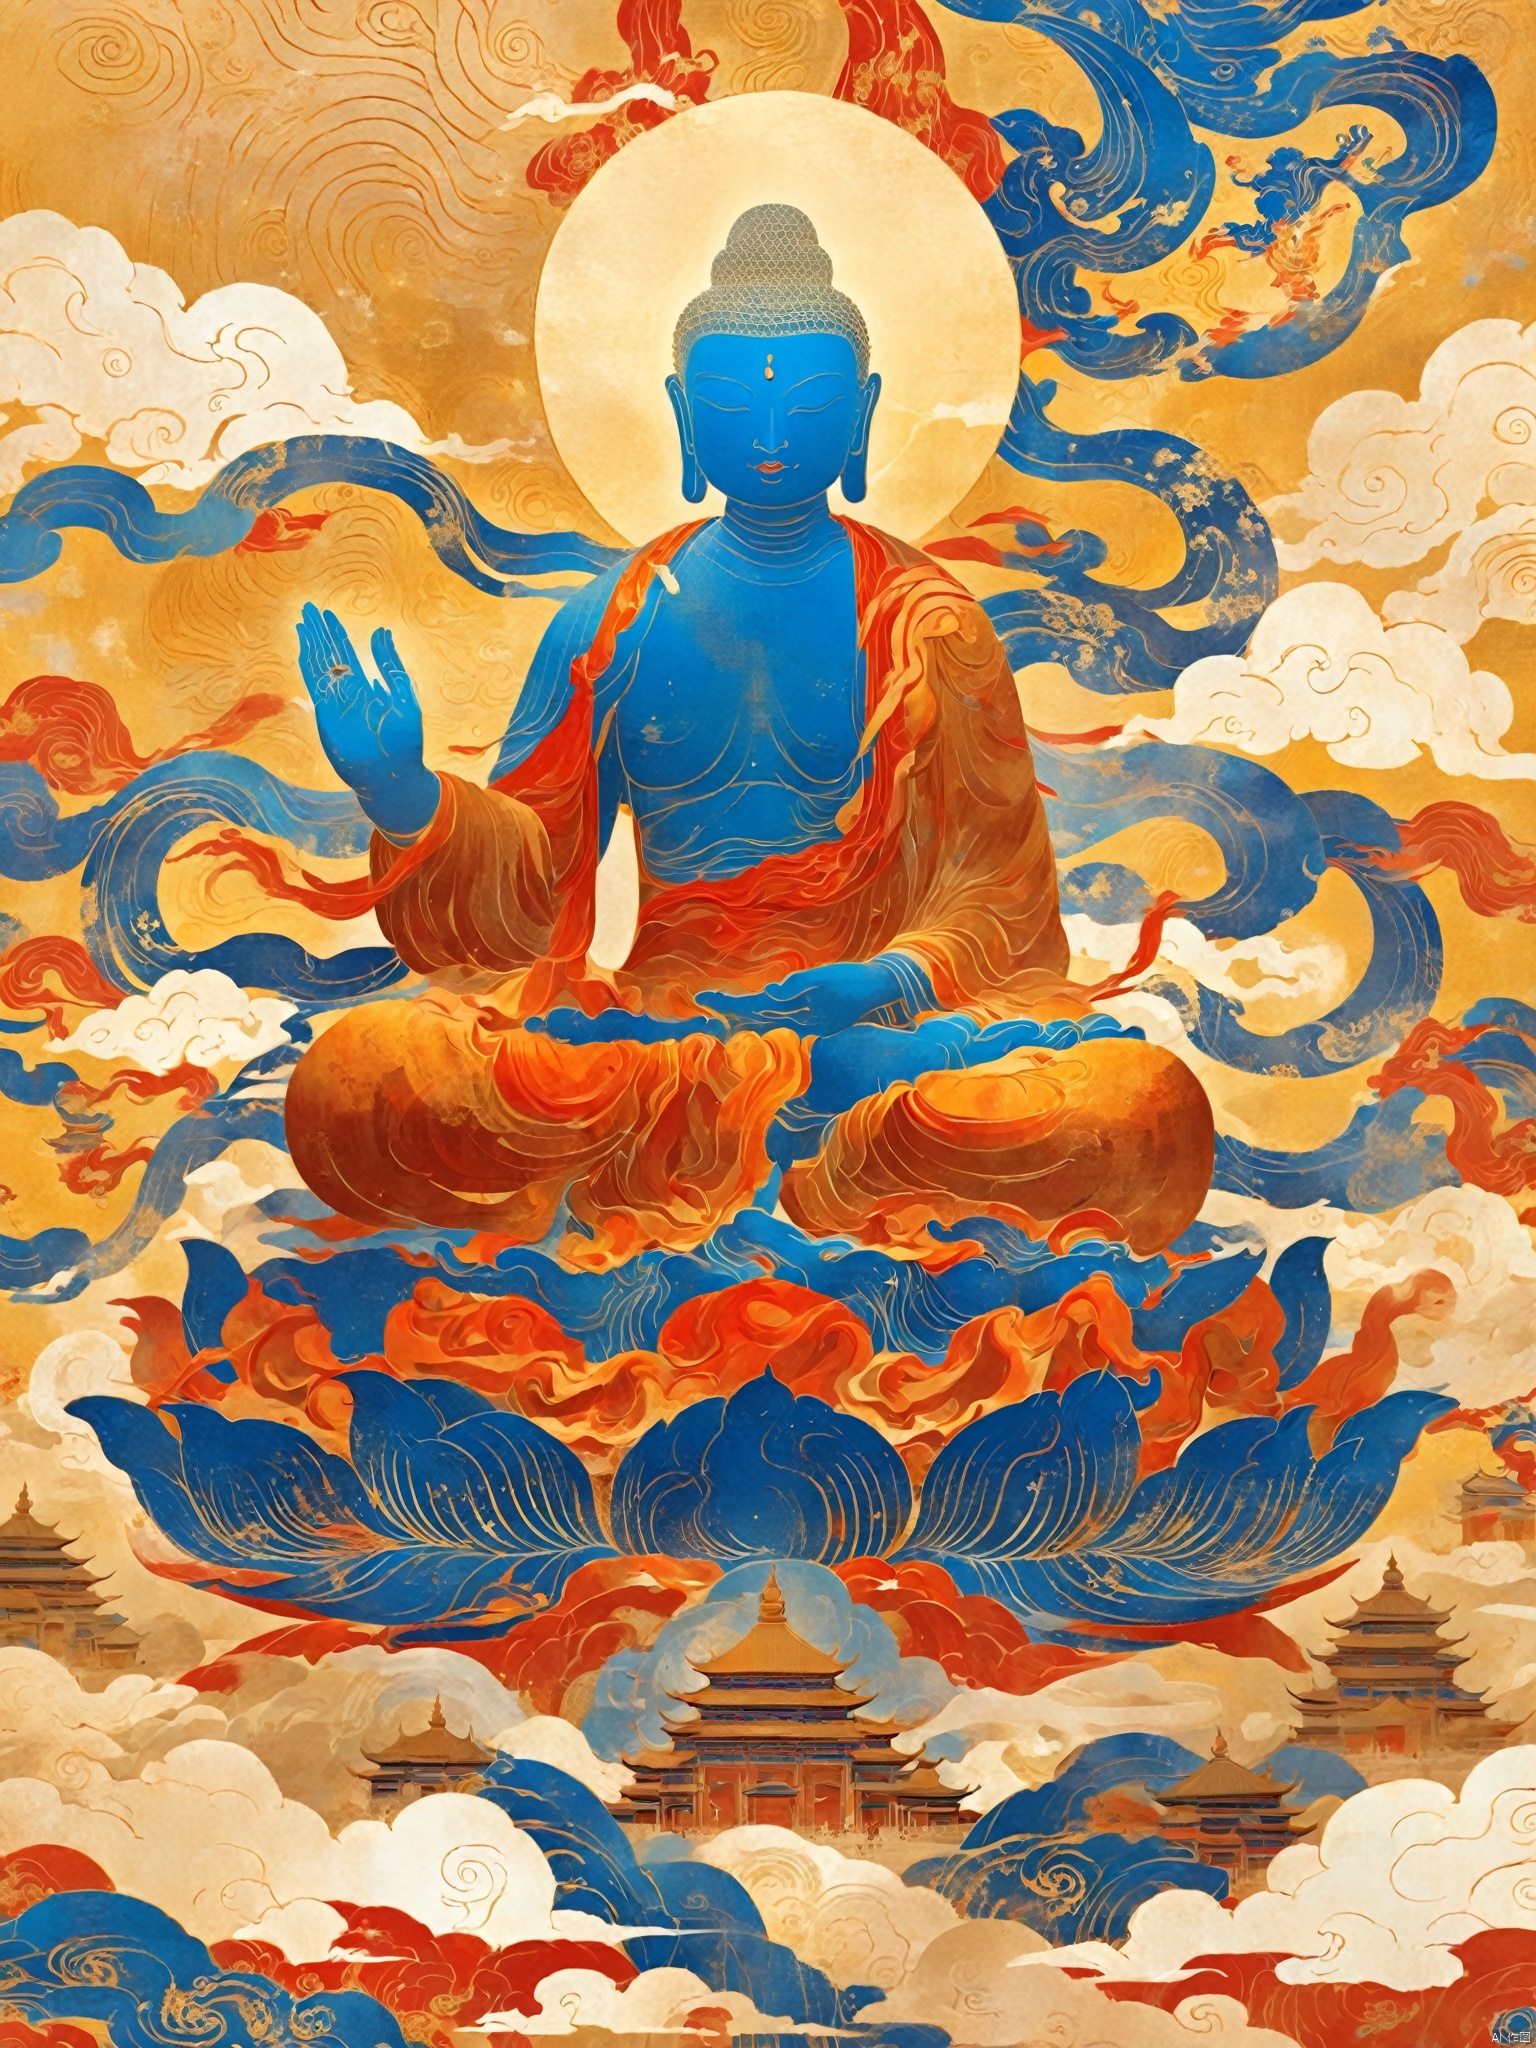  Dunhuang art style illustration,an extremely tiny monk sitting on the giant hand of Guanyin,nestled in continuous rolling ripples,extremely delicate brushstrokes, soft and smooth,China red and indigo,background covered with auspicious cloud patterns painted on gold foil